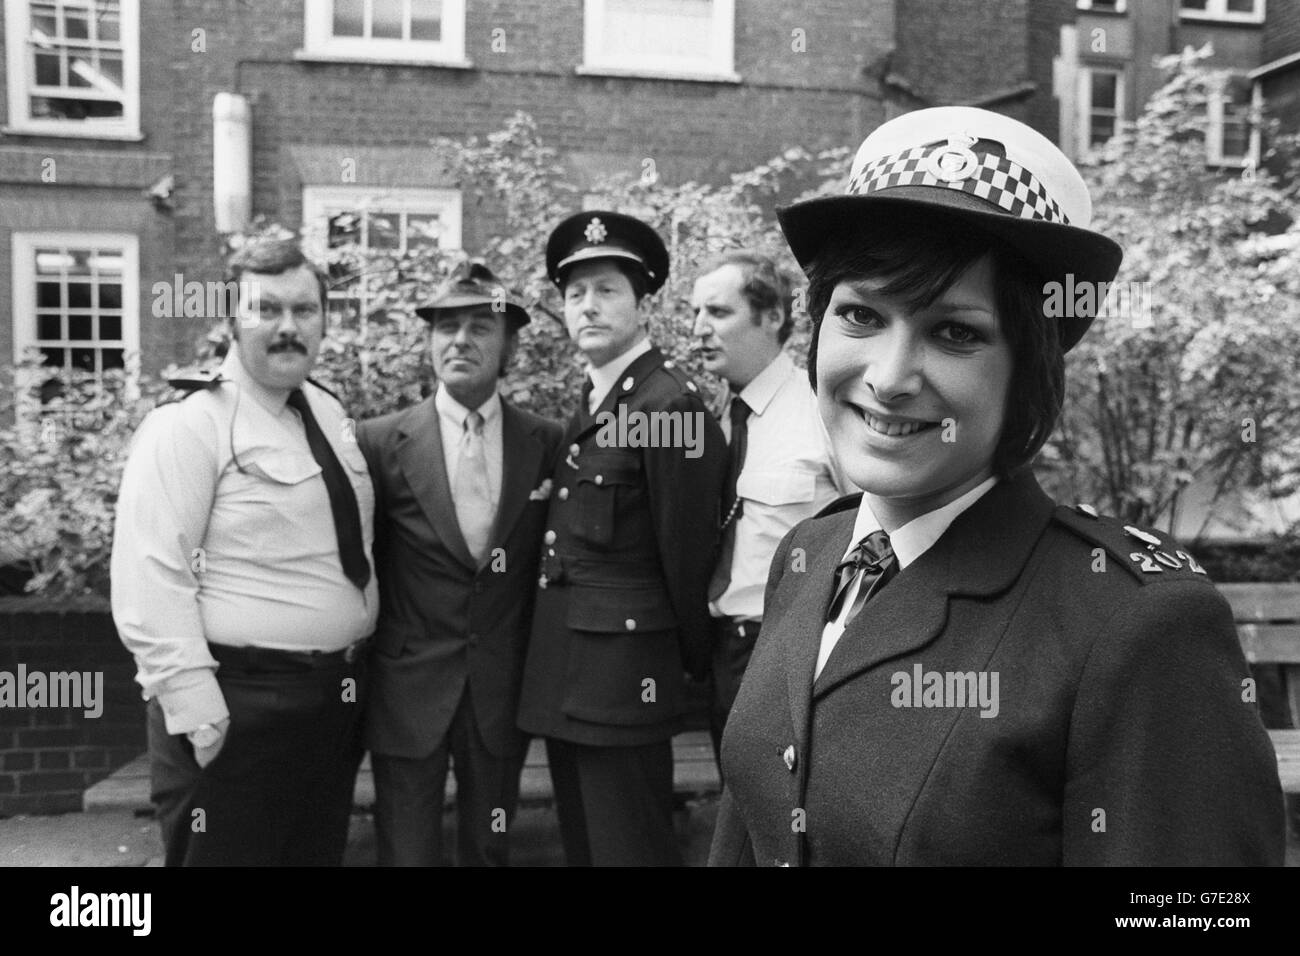 Entertainment - The Fuzz - Lynda Bellingham - London. Lynda Bellingham, in costume for the new comedy series 'The Fuzz', in London. Stock Photo